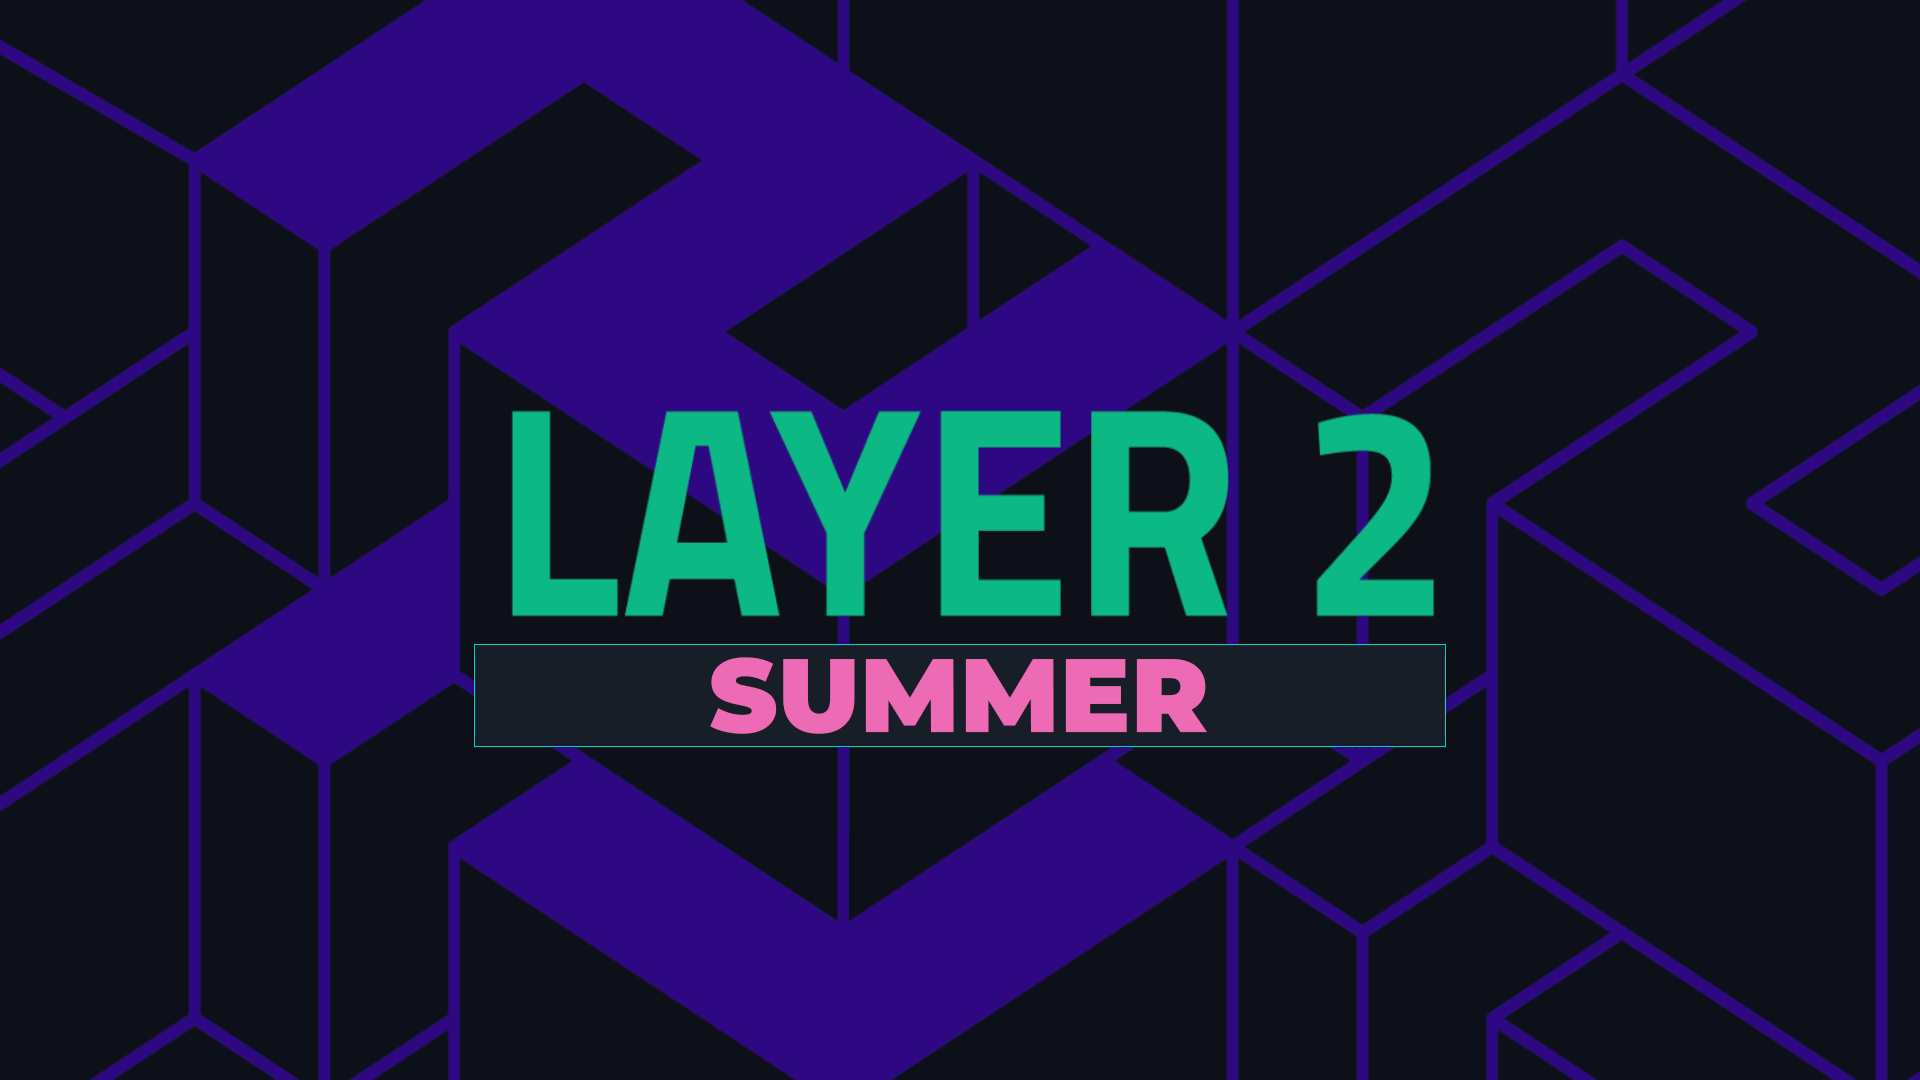 Is layer 2 summer really coming?